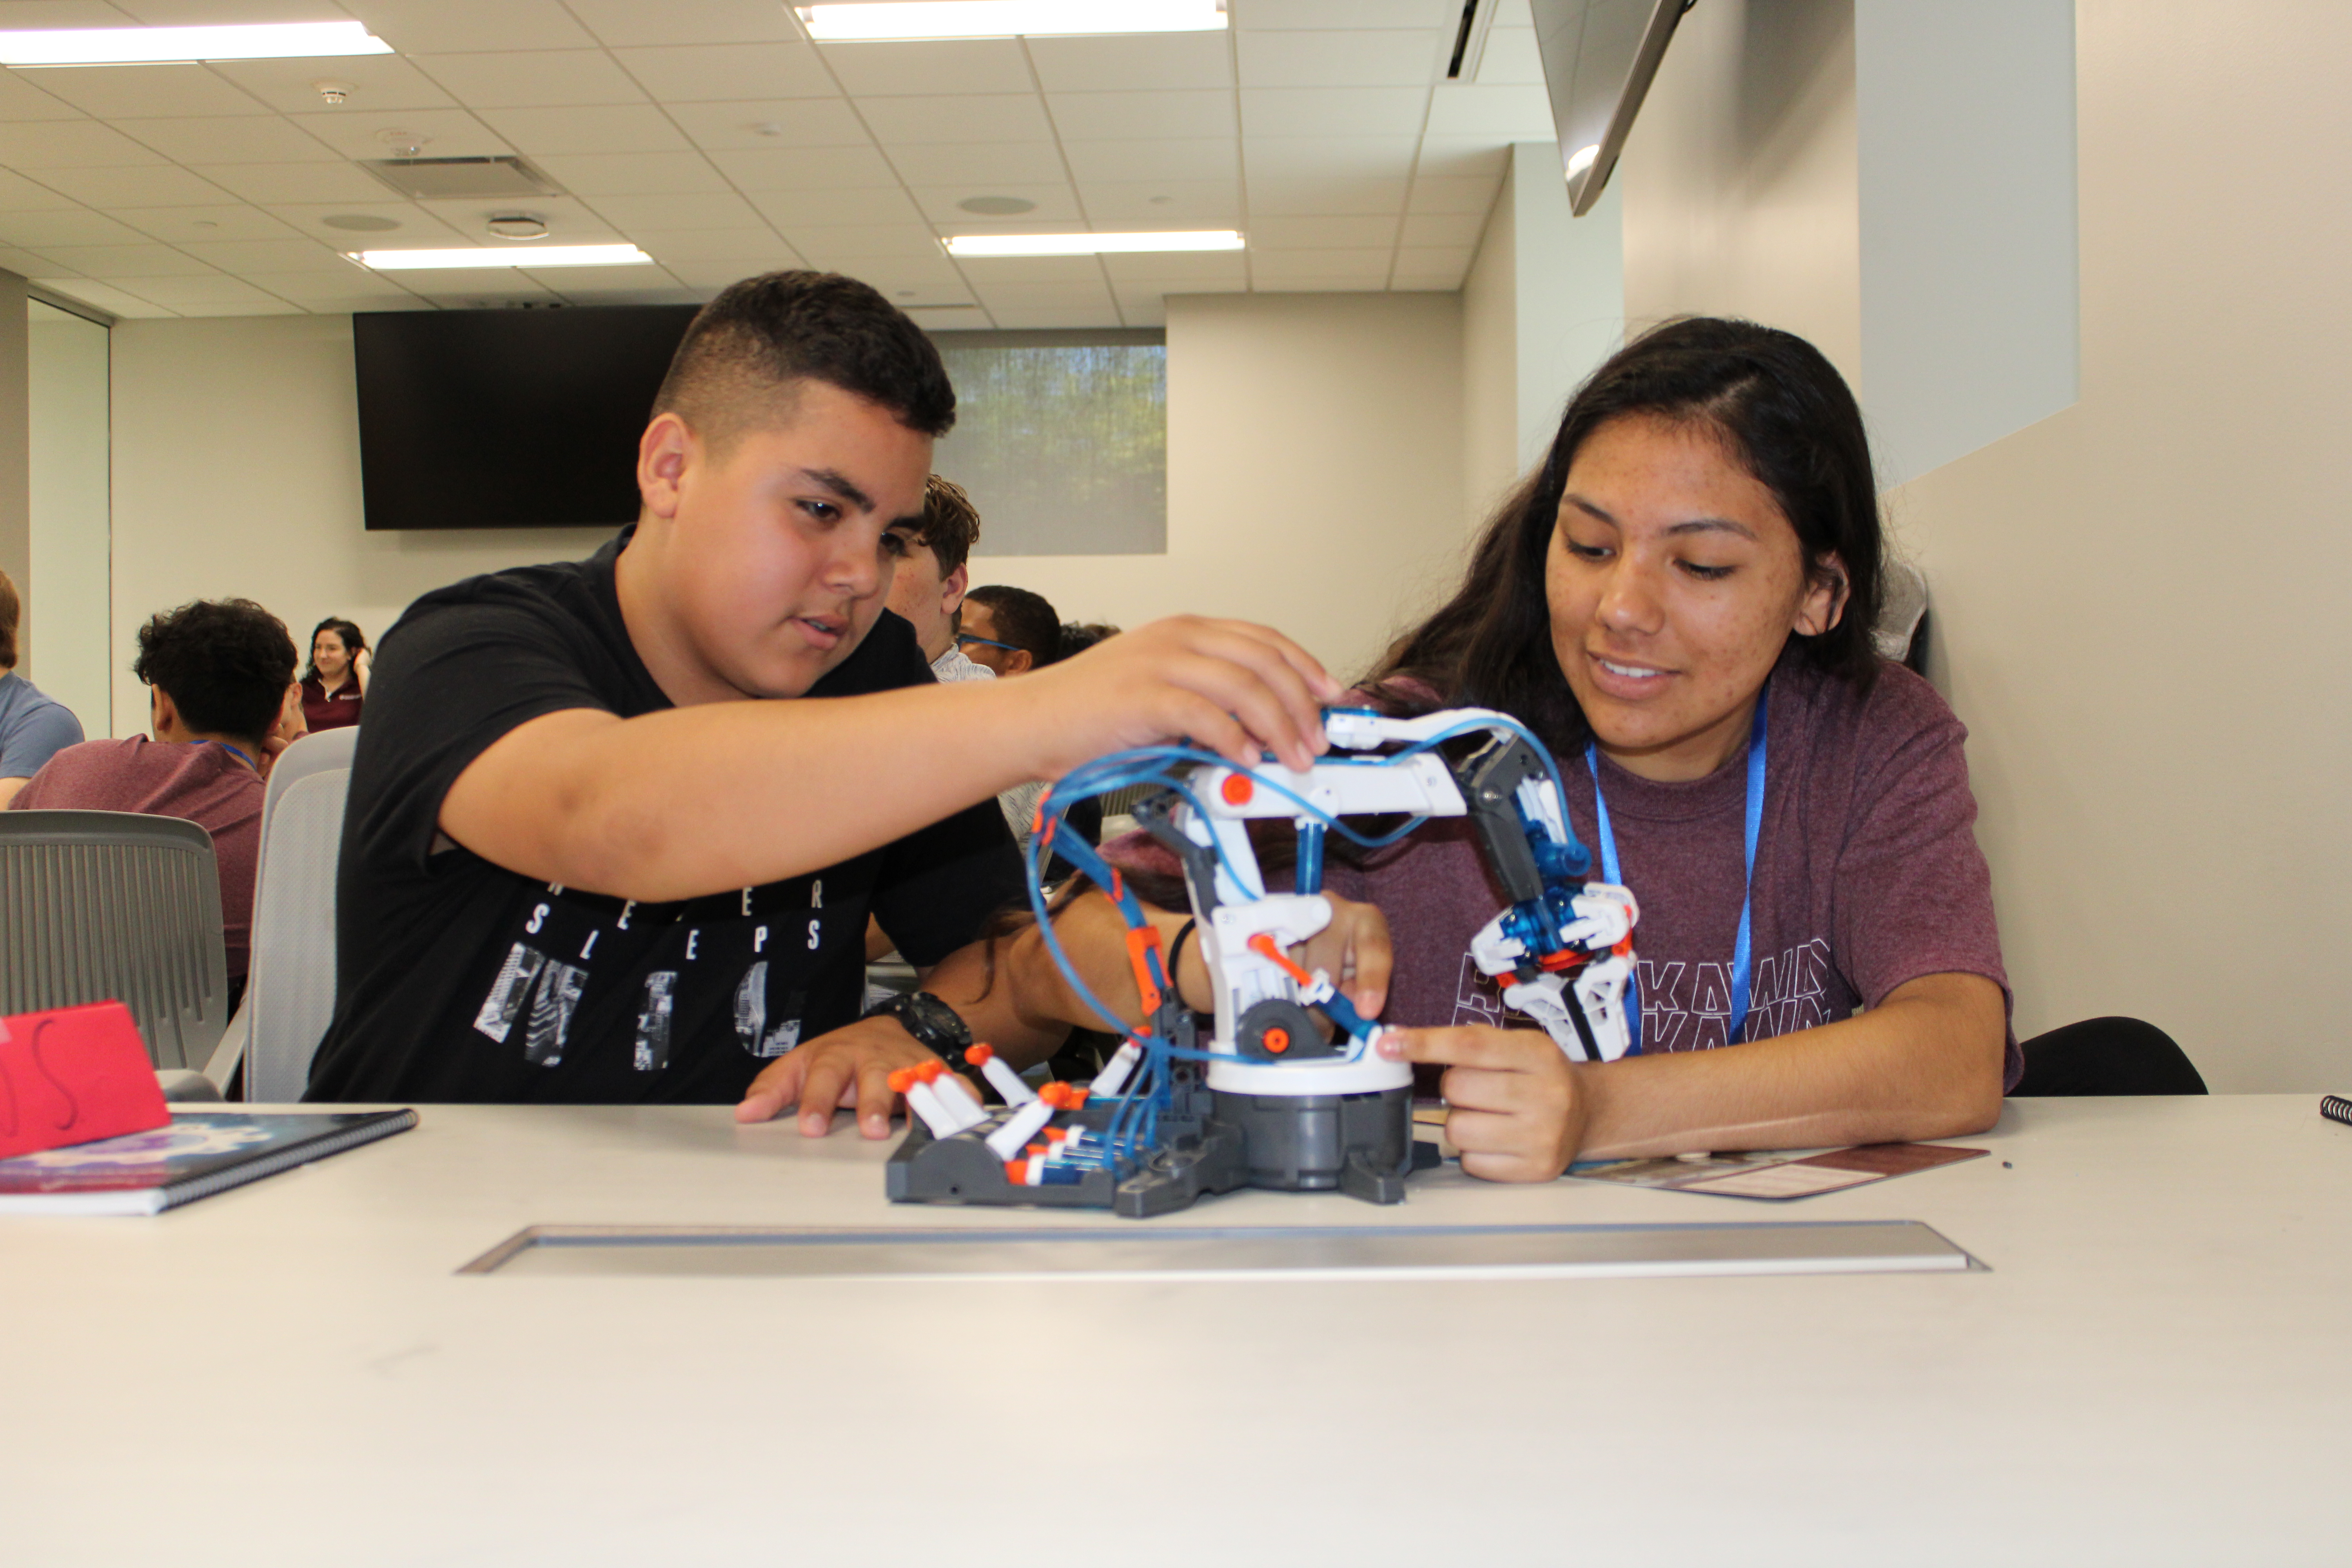 IEEE TryEngineering Summer Institute students collaborating on a project.